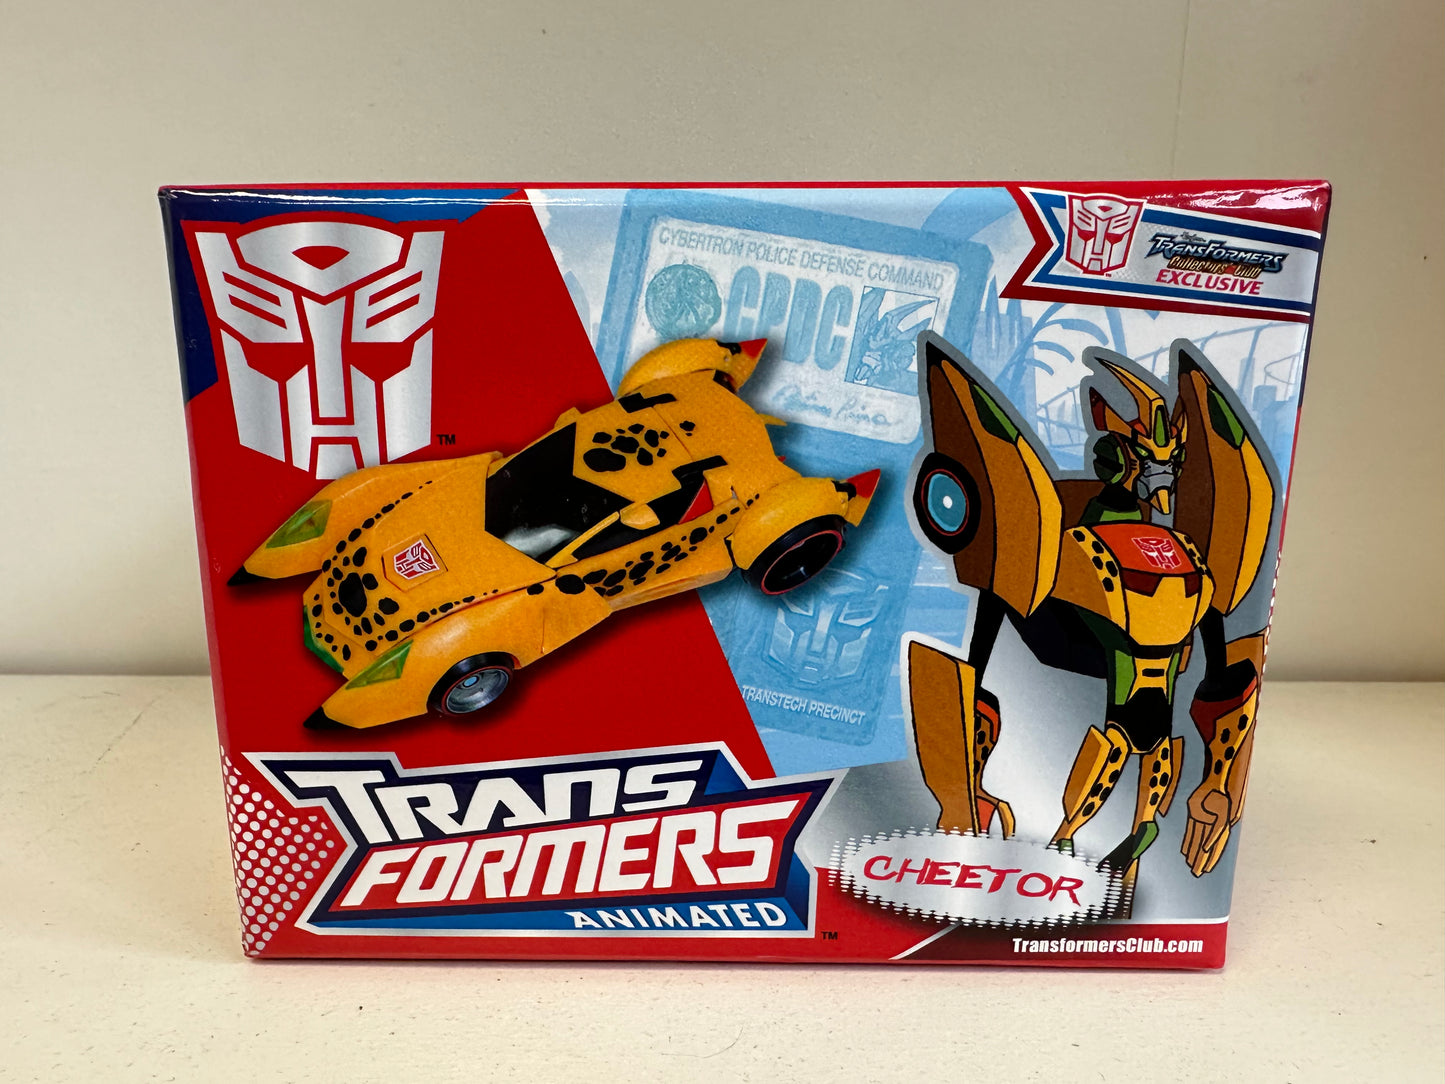 Transformers Animated Cheetos Transformers Club Exclusive Unused in Box